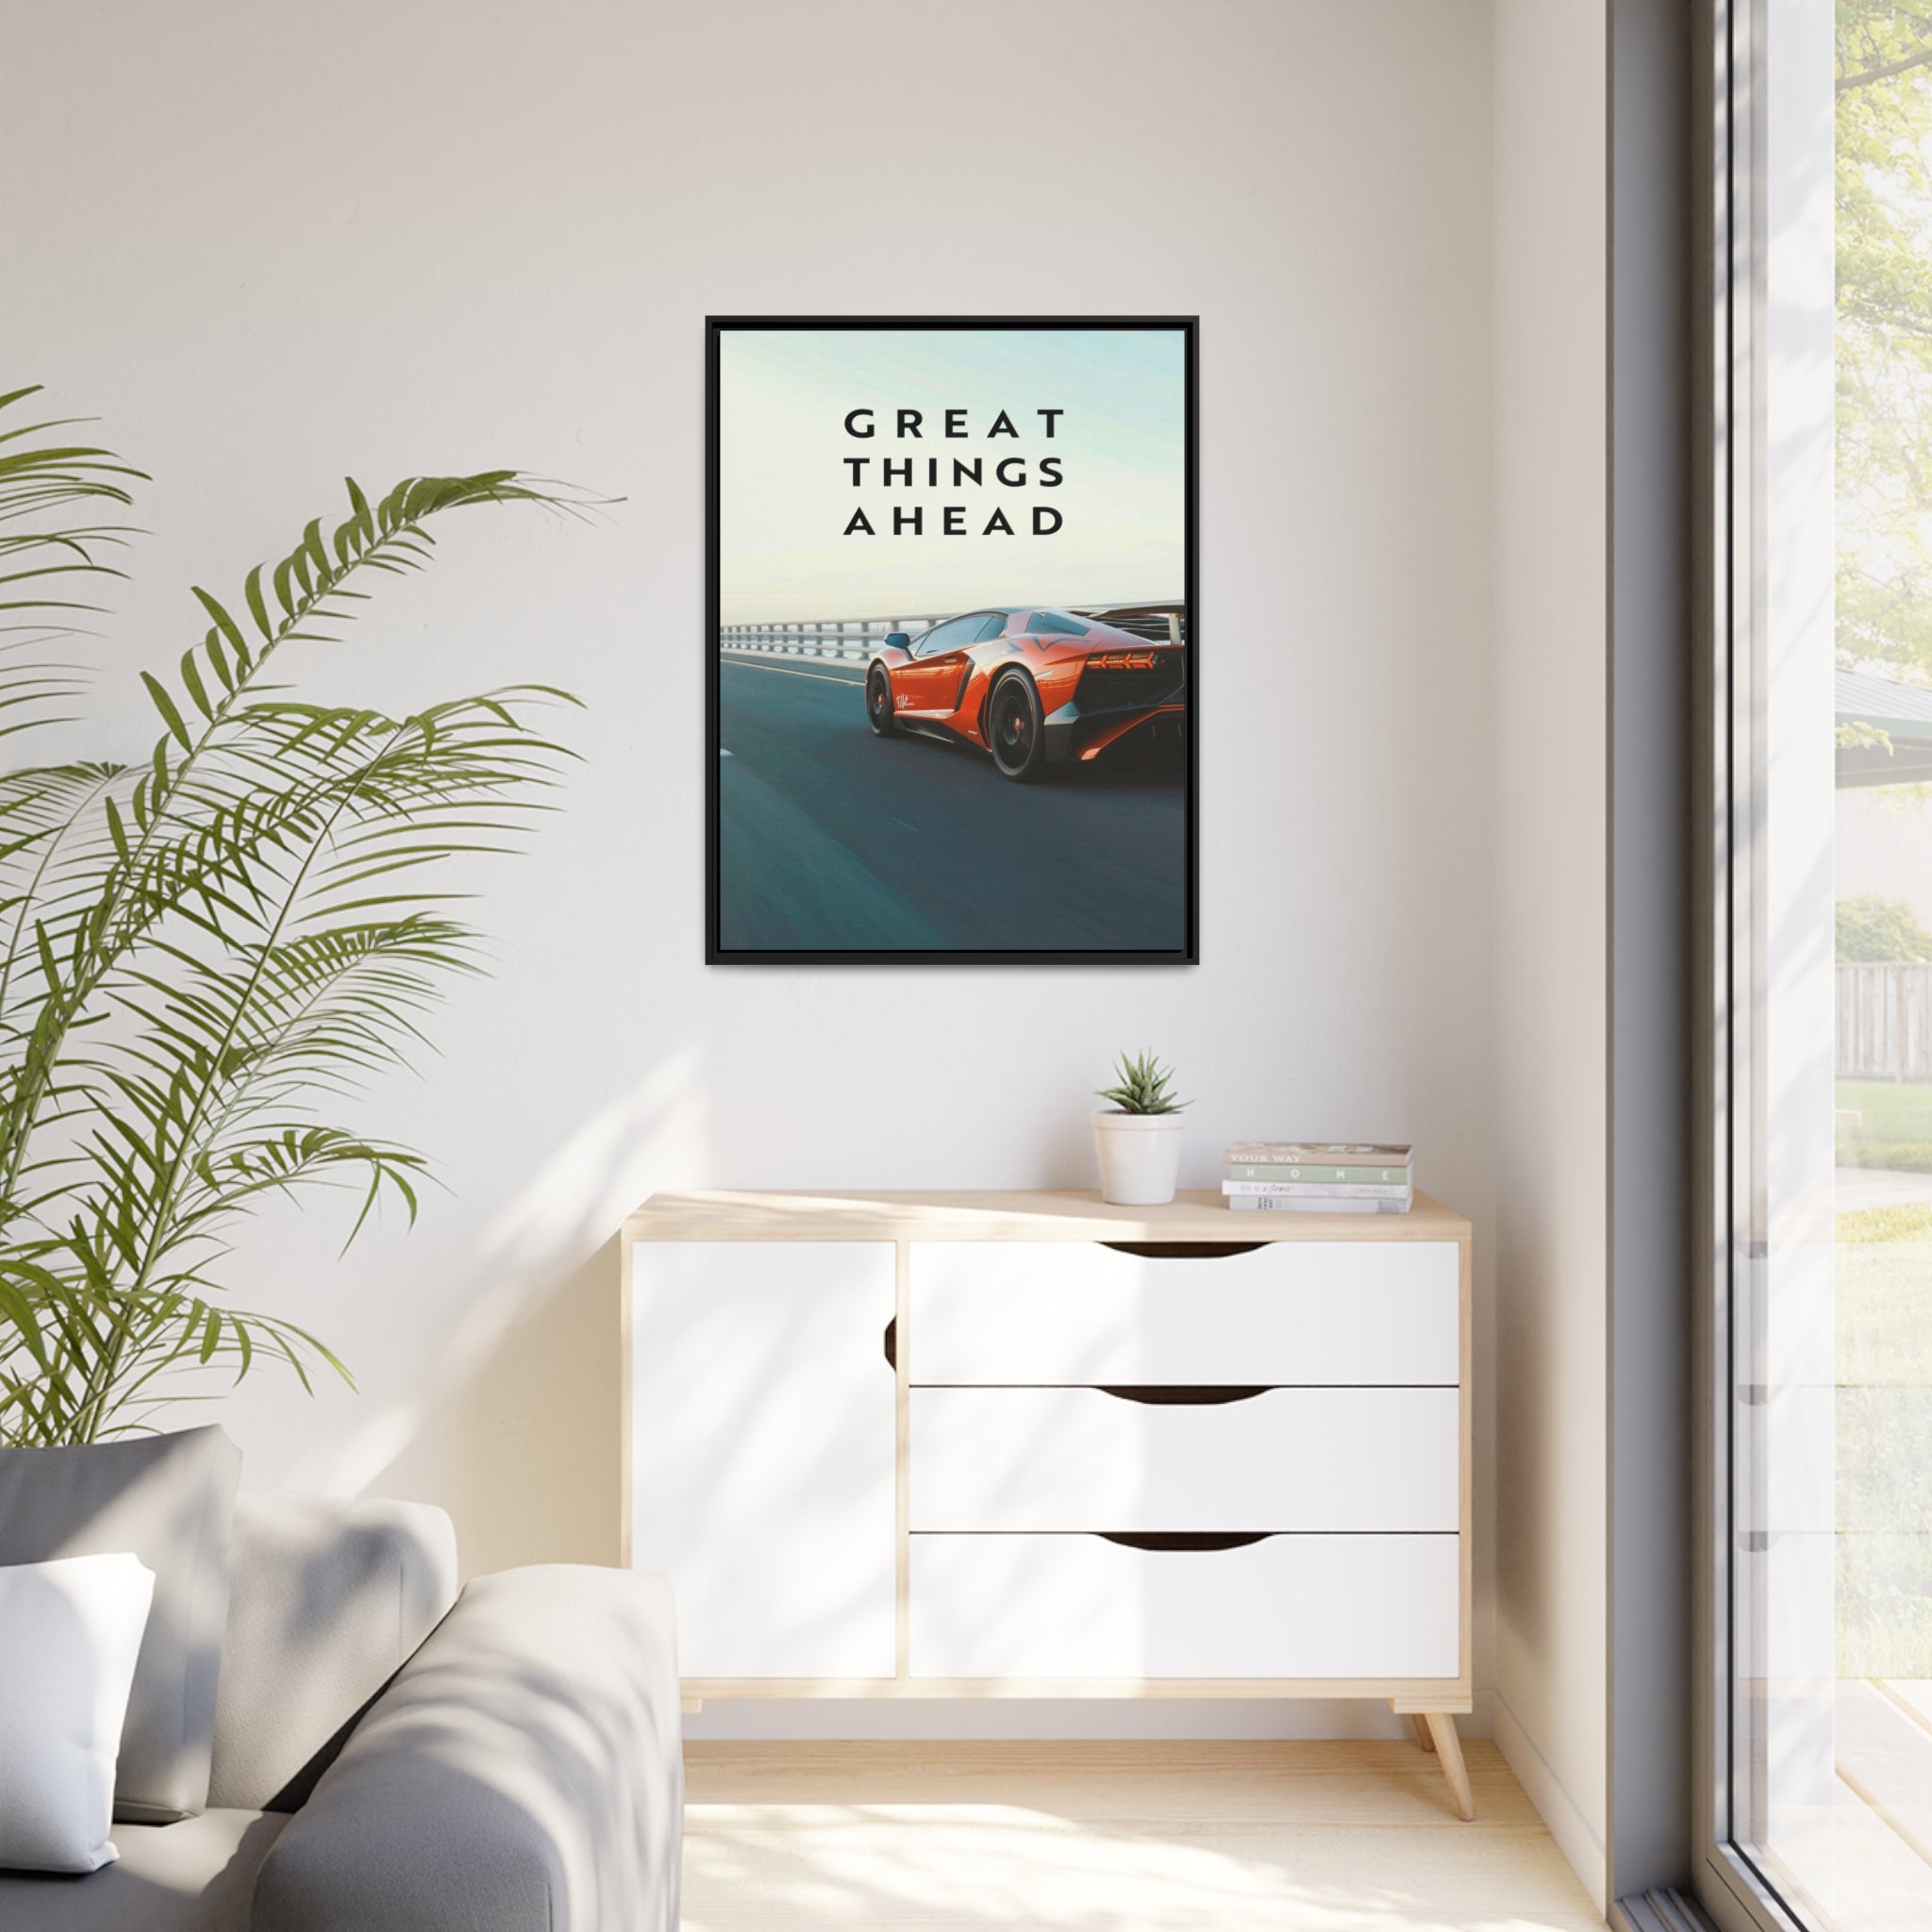 Great Things Ahead - Sports Car - Wall Art additional image 6